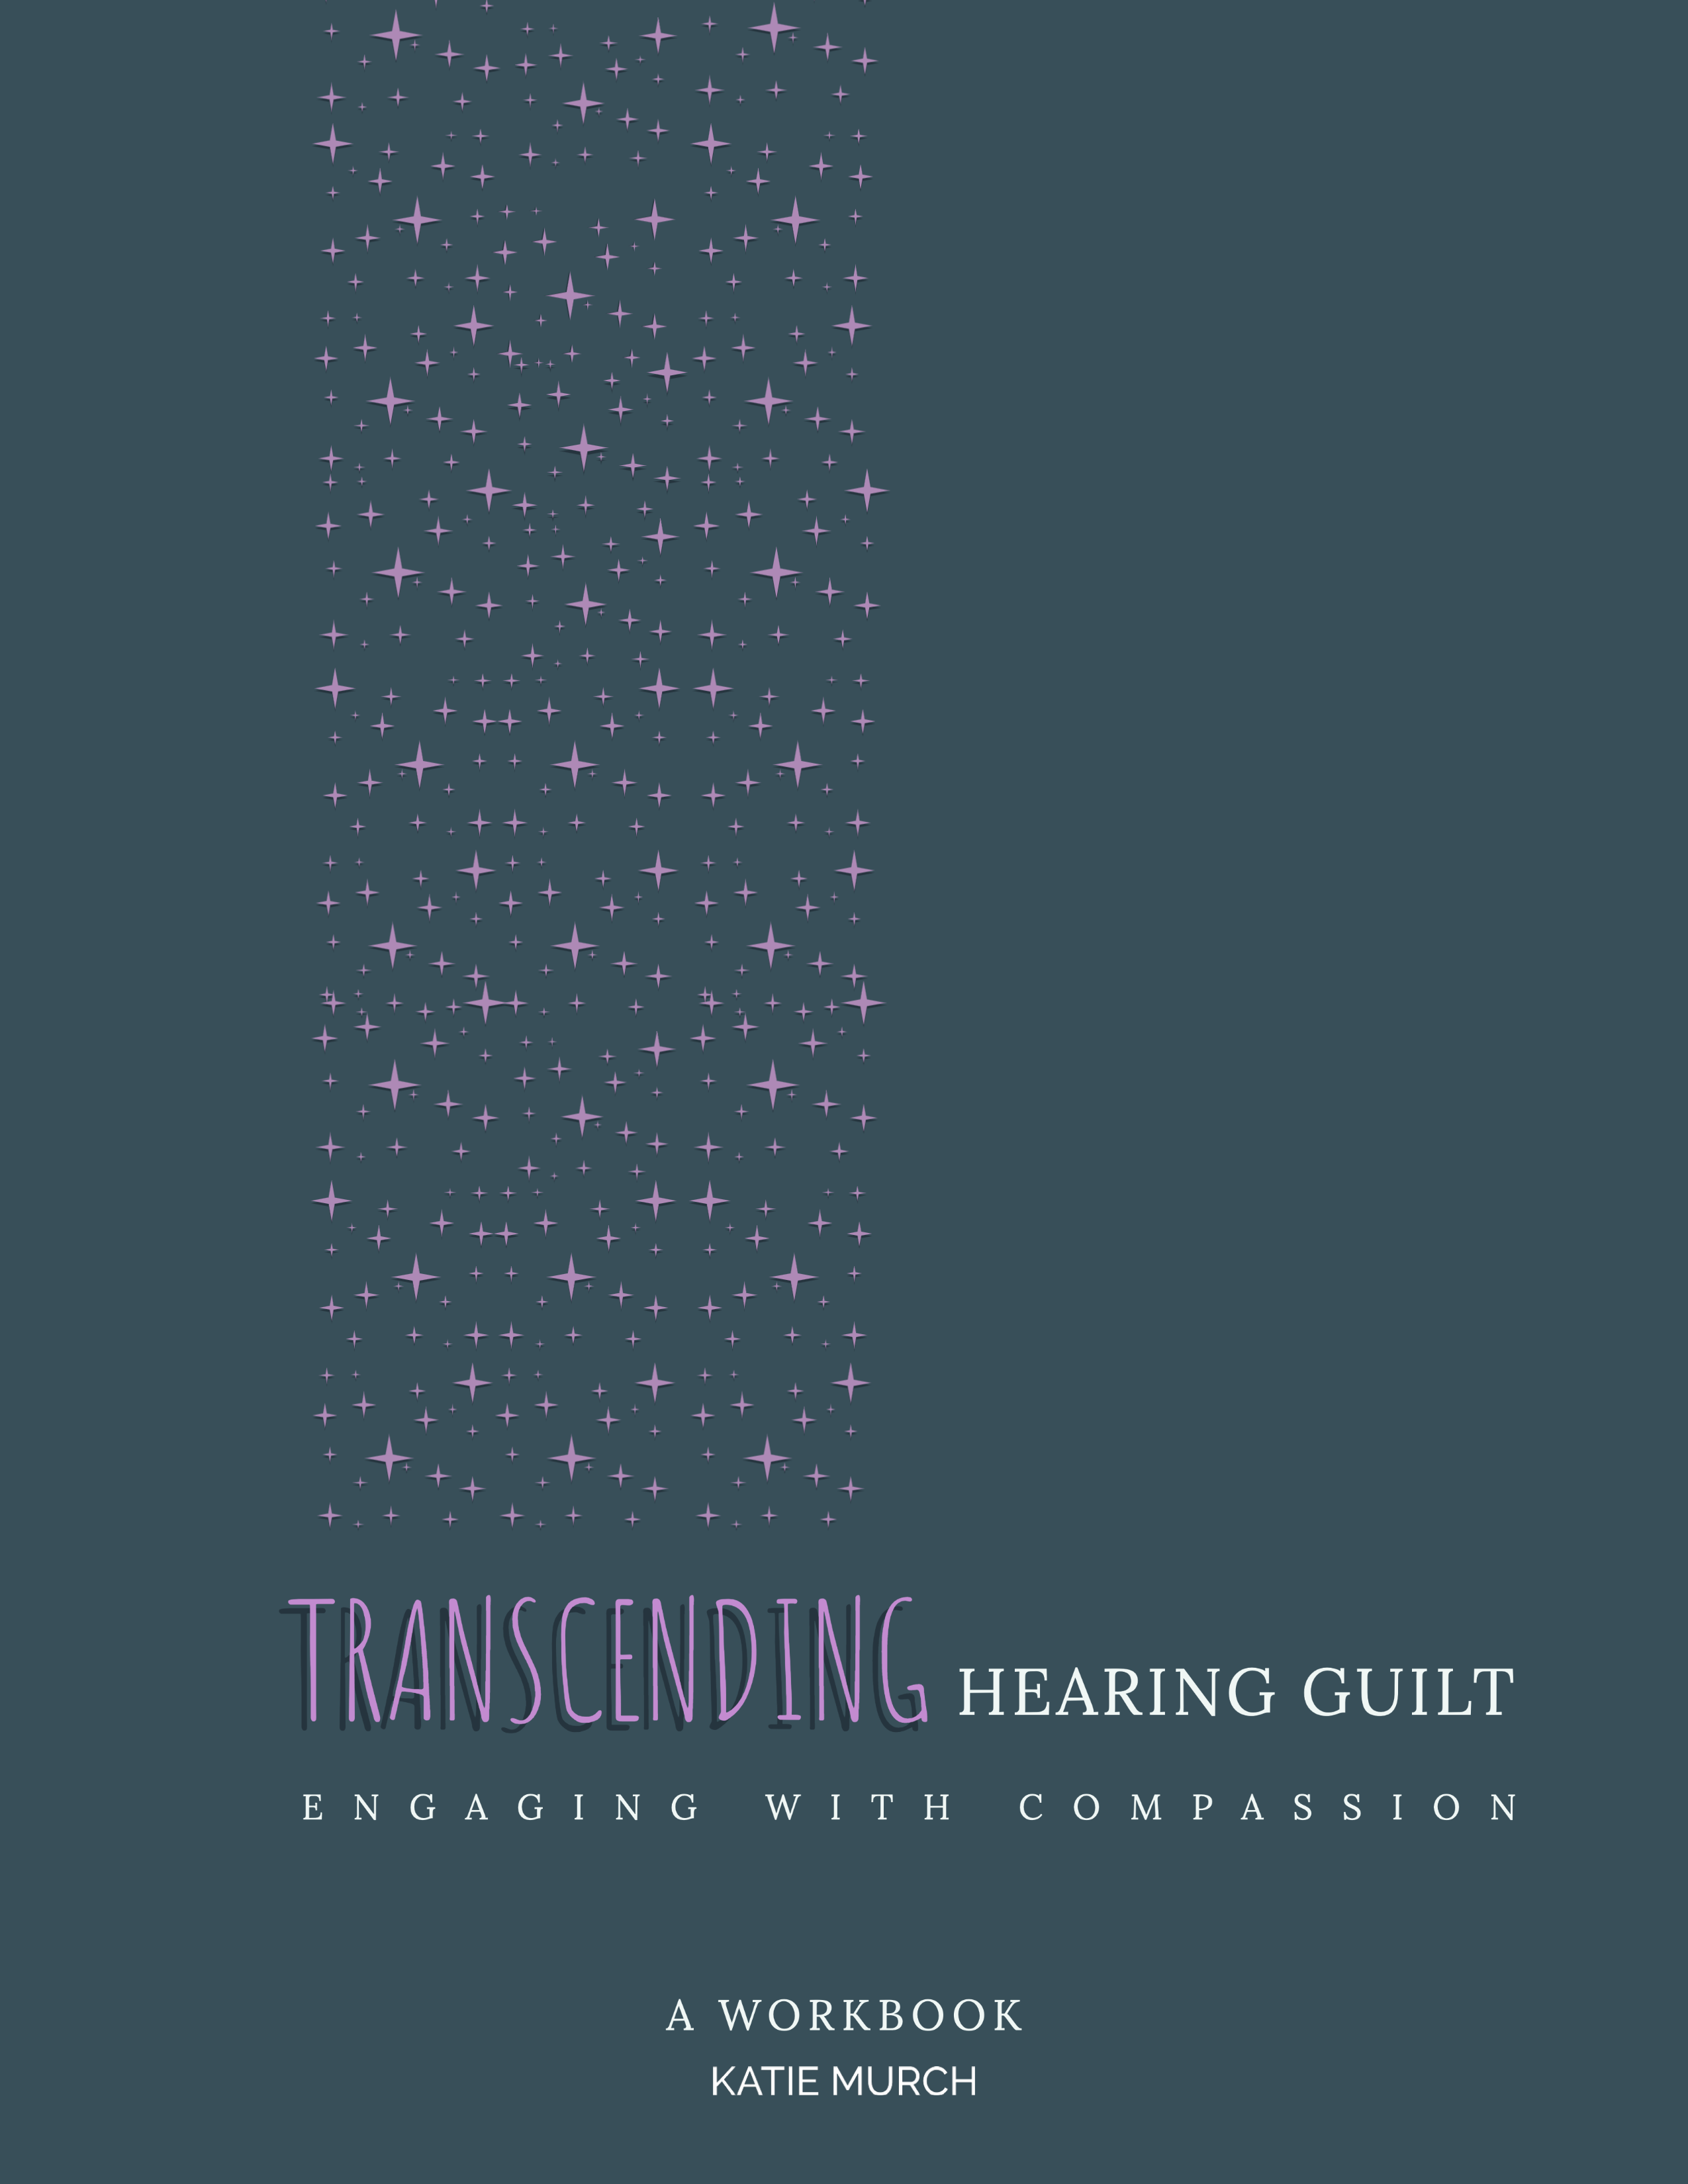 A blue-gray background has purple stars cascading from the top to "TRANSCENDING" on the bottom. Next to the word is "Hearing Guilt". Underneath is "ENGAGING WITH COMPASSION". On the bottom is "A WORKBOOK" and "KATIE MURCH".